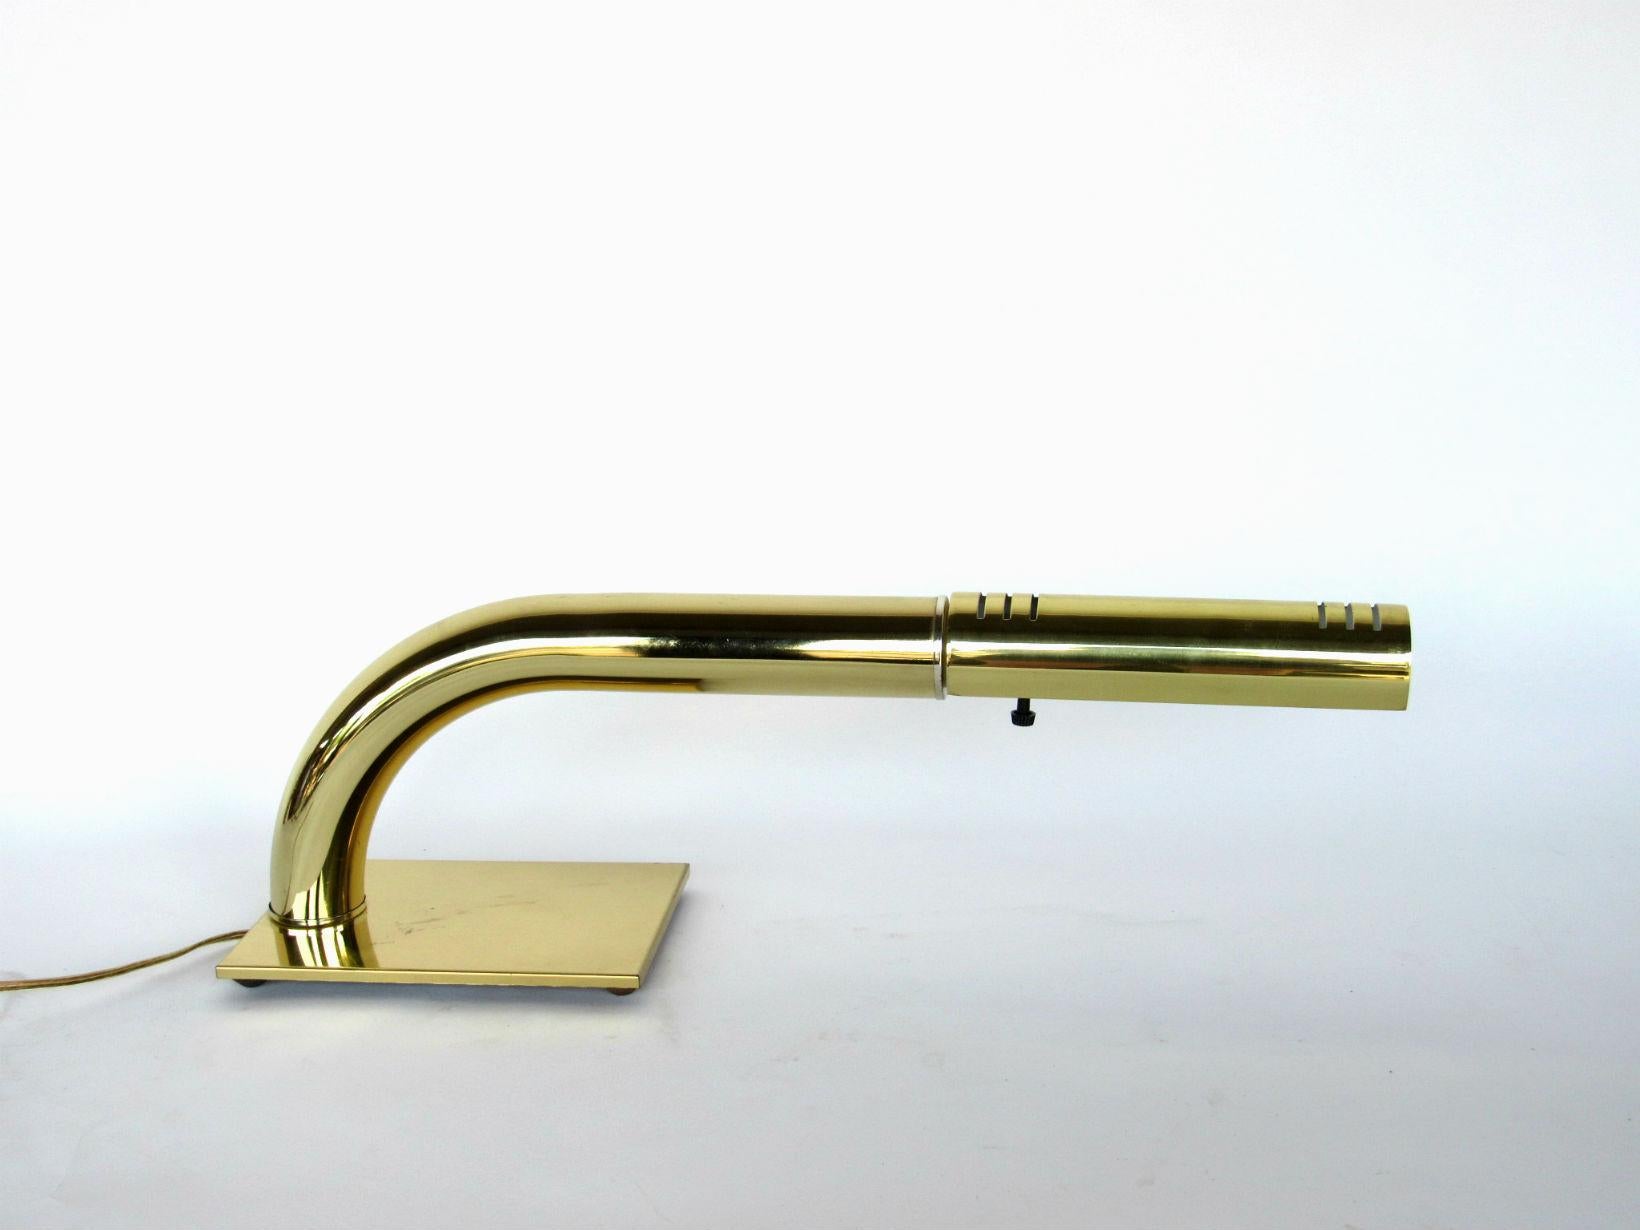 Jim Bindman for the Rainbow Lamp Company, American 1970s. Sleek brass desk lamp featuring a tubular design with directional shade resting on a cast iron base. The lamp is touch sensitive, tap anywhere on the lamp to control on/off and cycle through